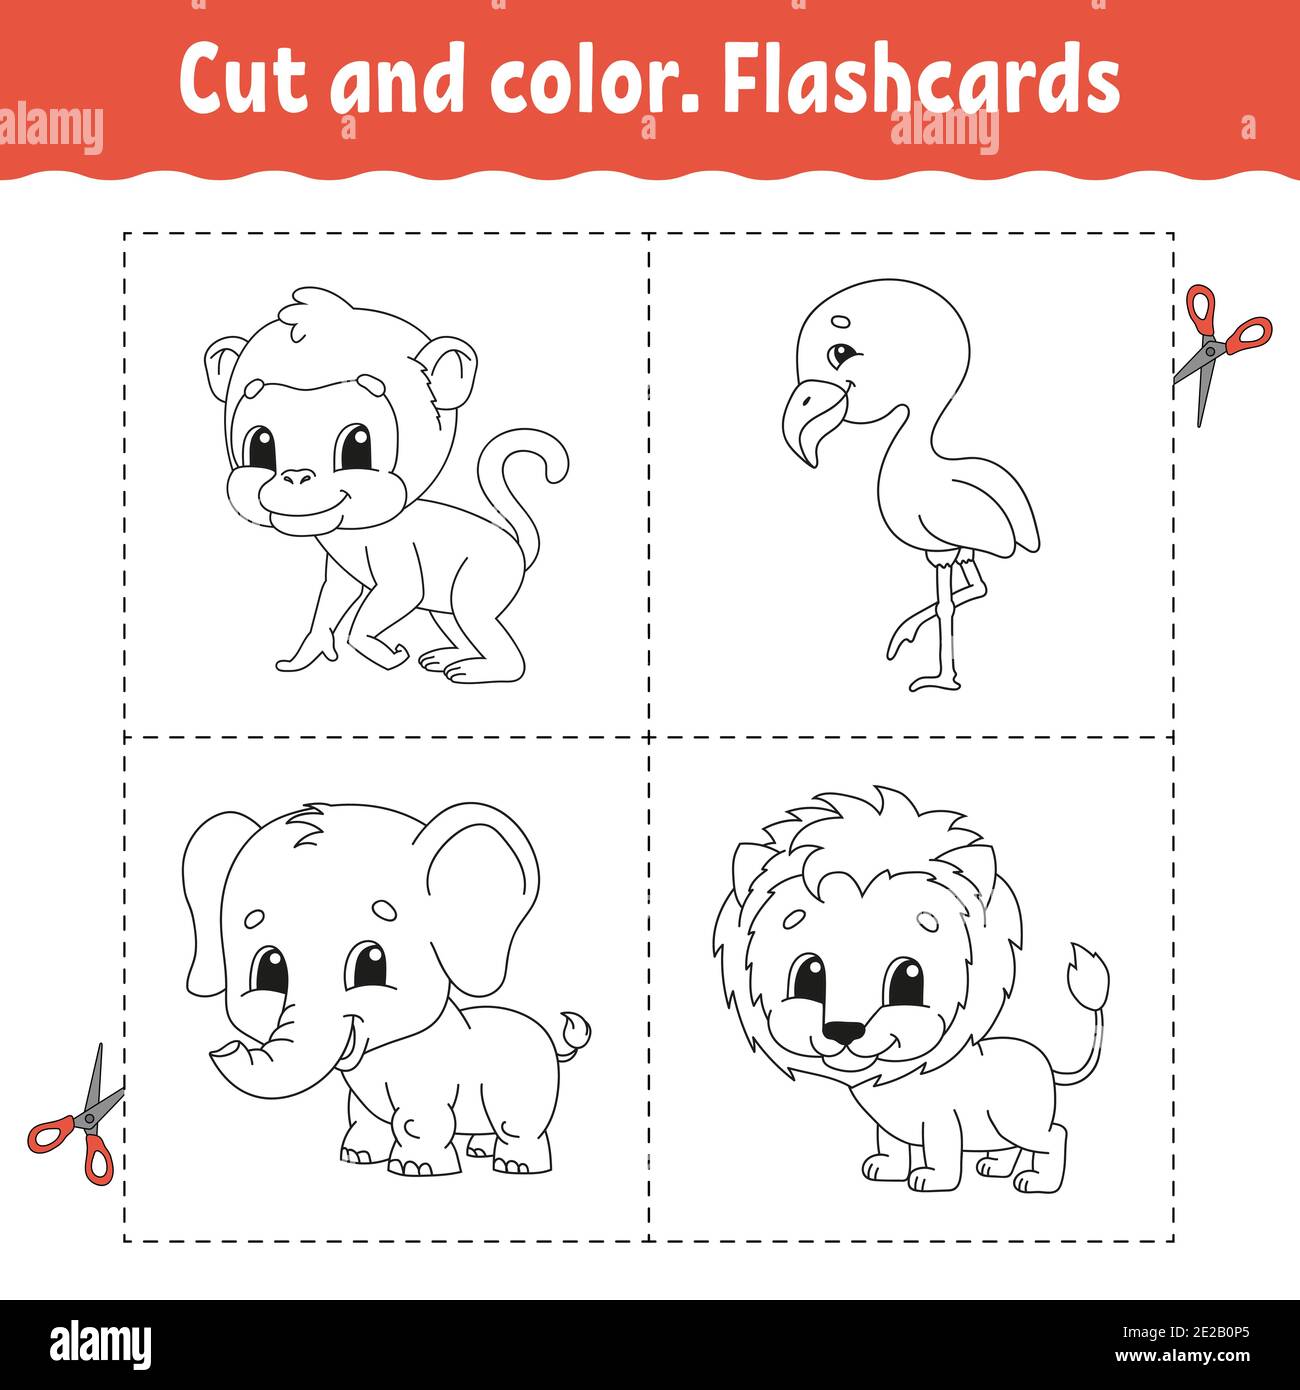 Cut and color. Flashcard Set. flamingo, lion, monkey, elephant. Coloring book for kids. Cartoon character. Cute animal. Stock Vector